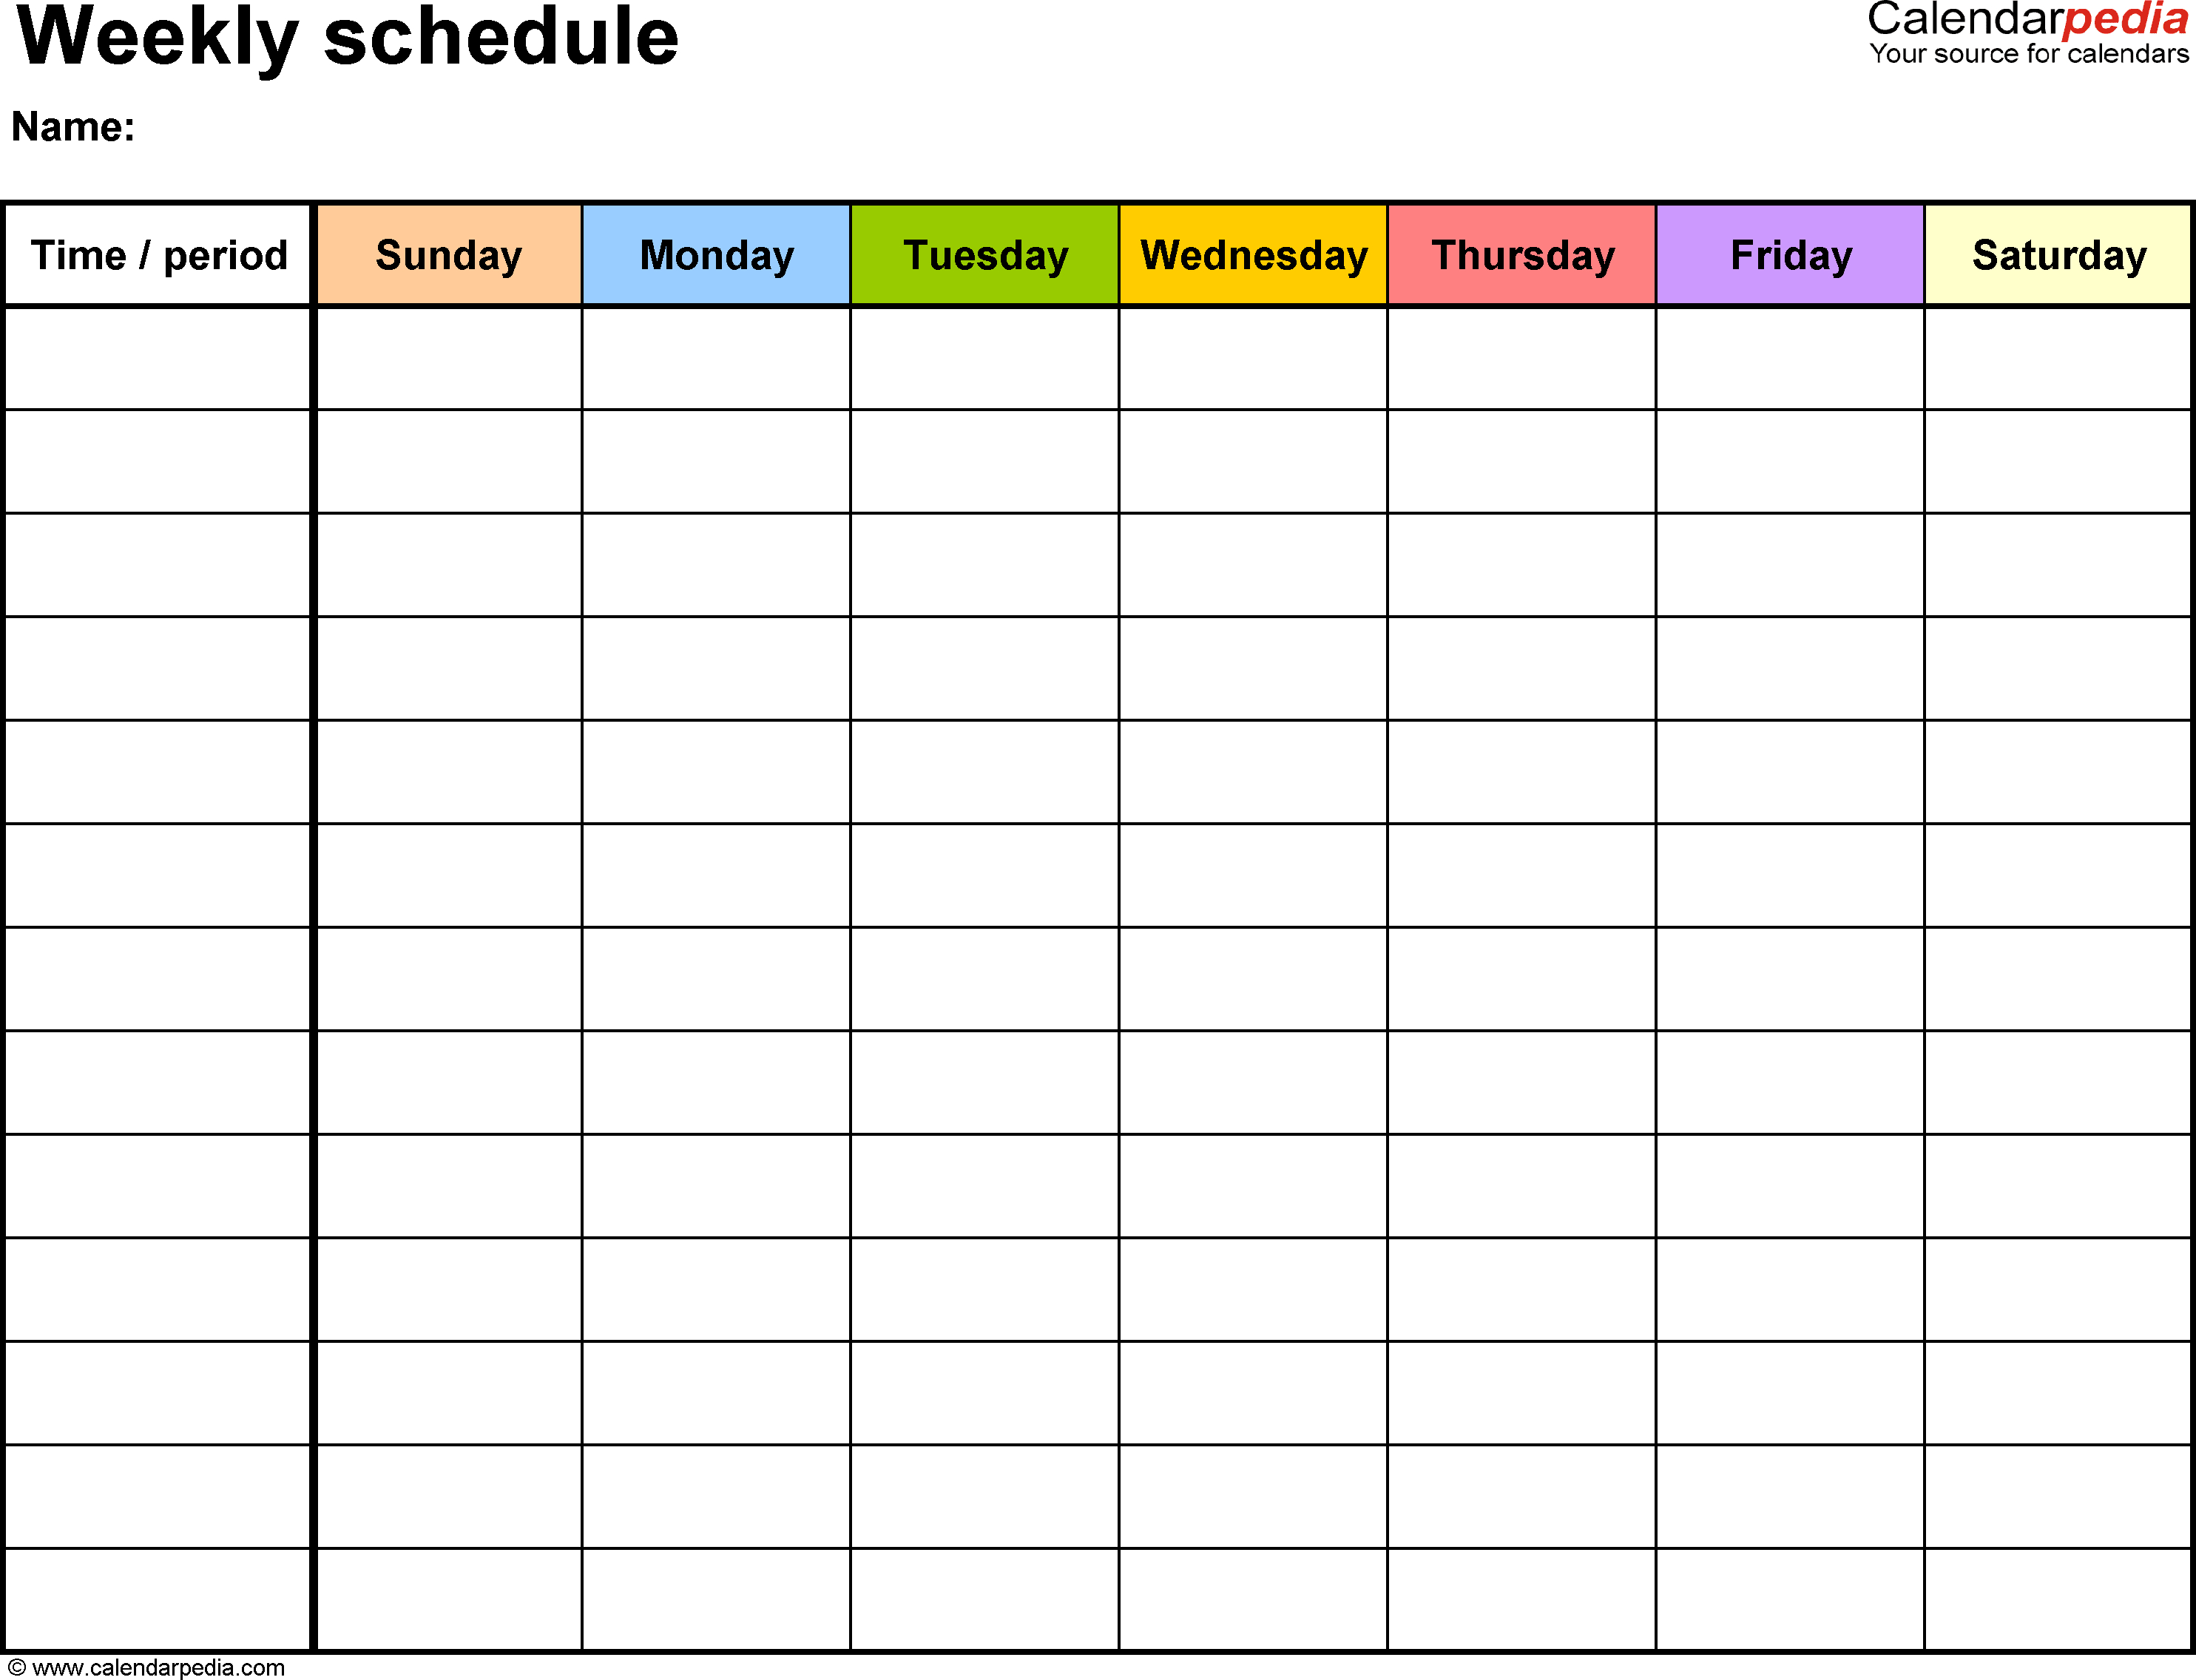 Free Weekly Schedule Templates For Pdf - 18 Templates - Free Printable Weekly Schedule